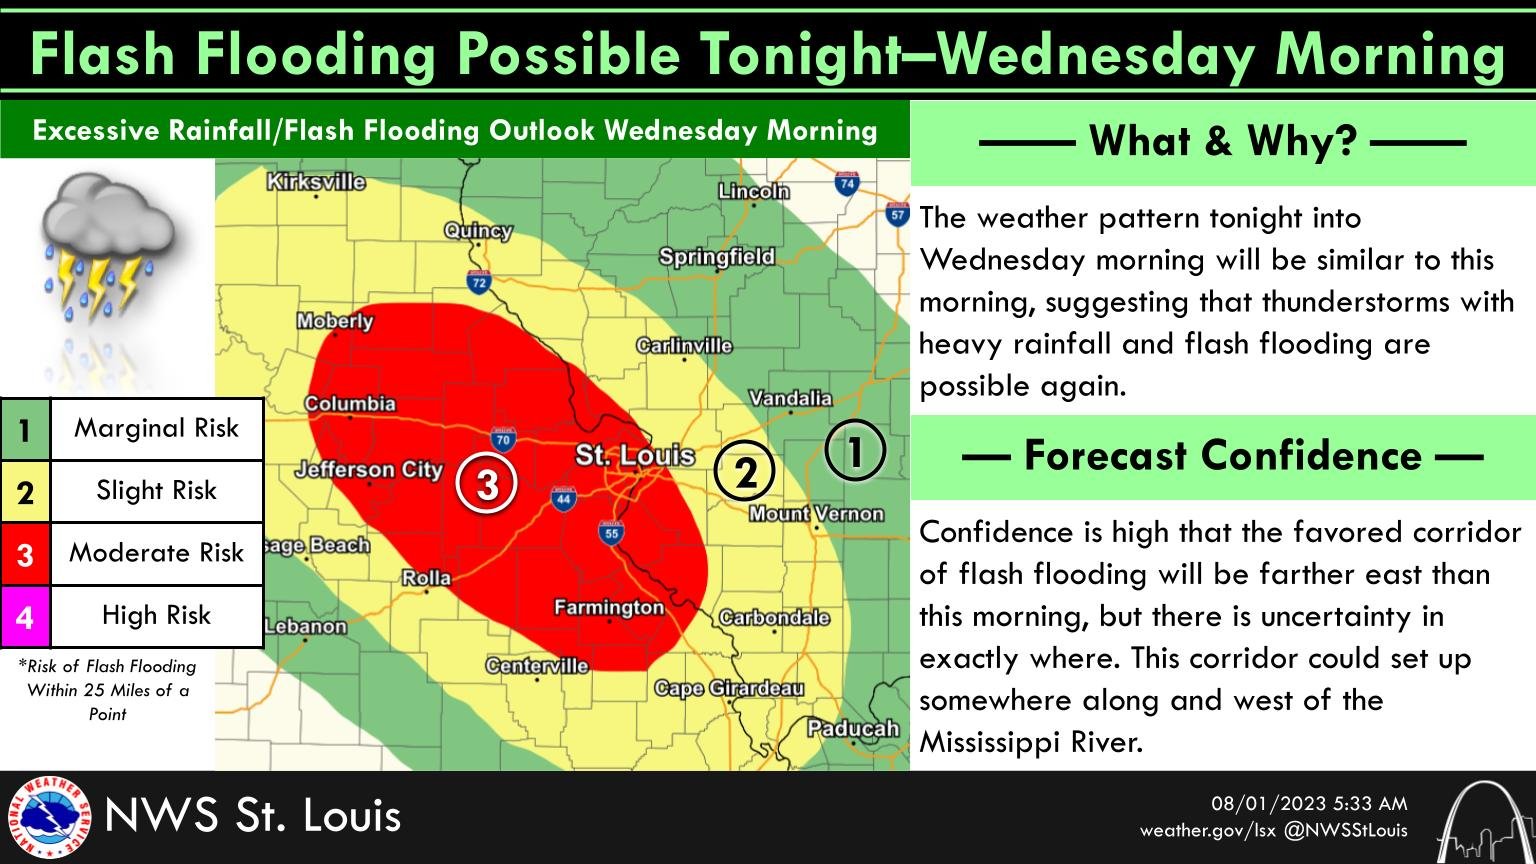 UPDATE: NWS St. Louis says flash flooding is possible again tonight into Wednesday in central Missouri